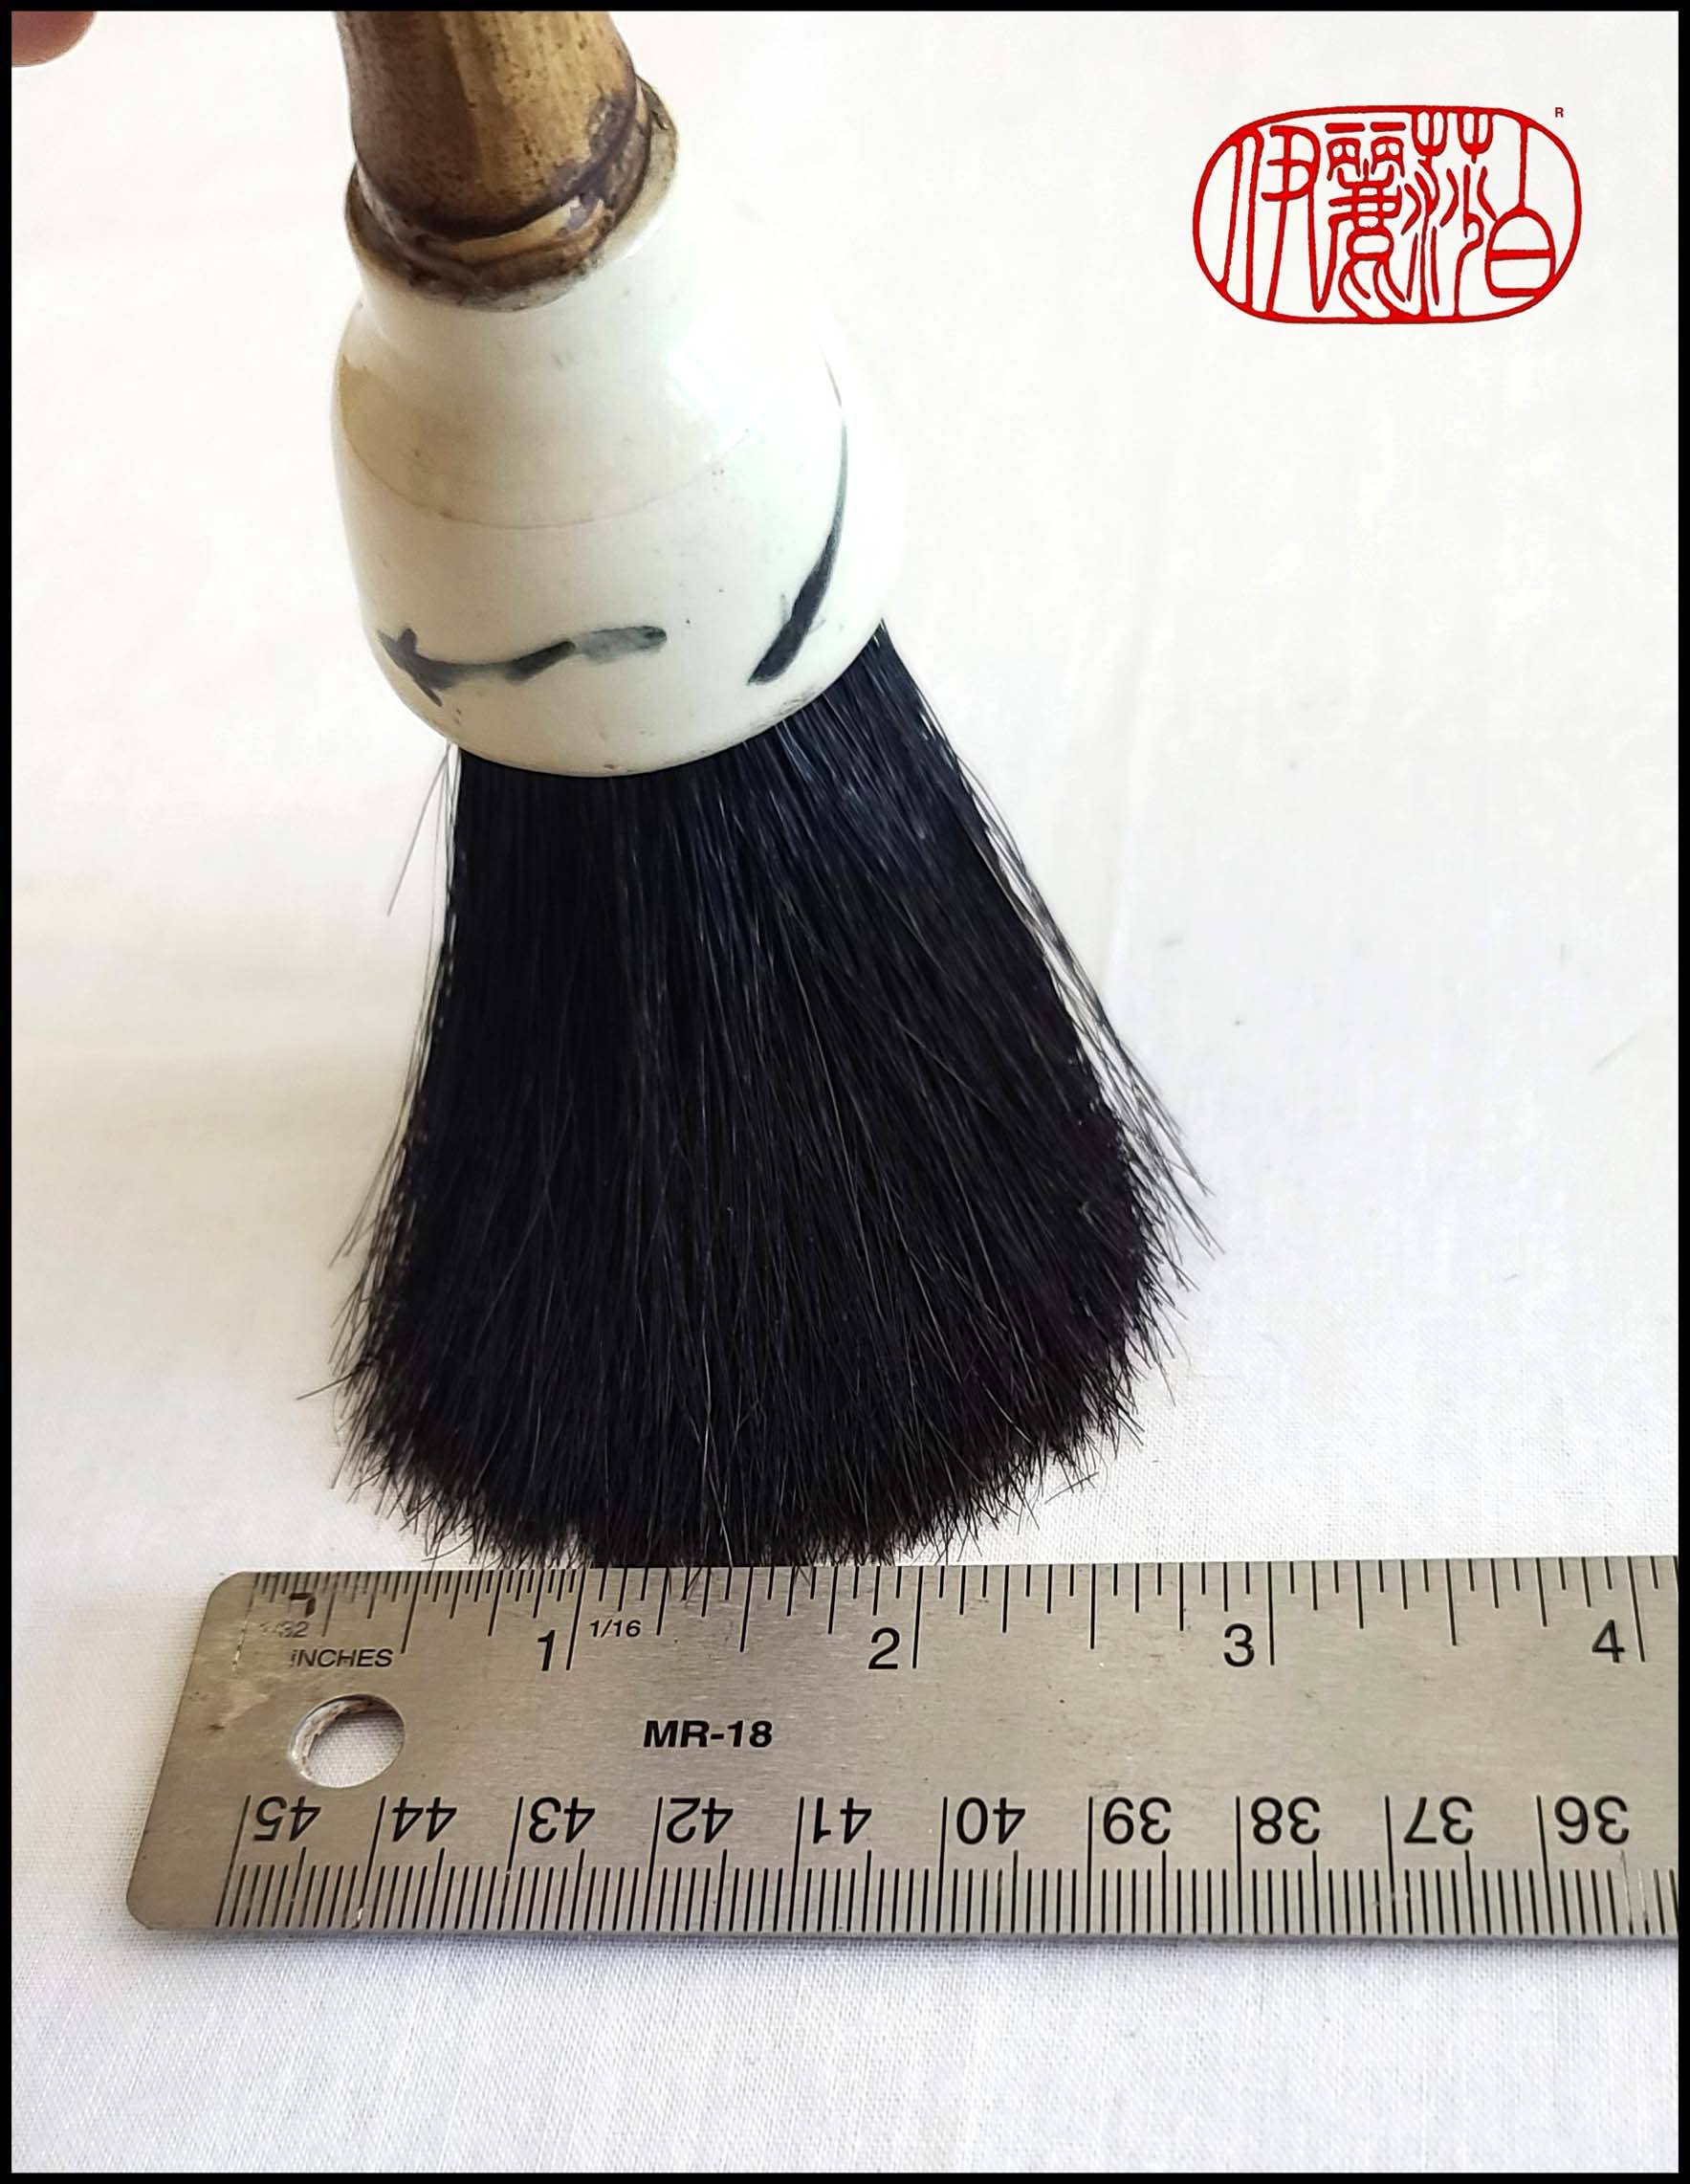 Handcrafted Premium Horsehair Brush for Sumi-e and Dynamic Artistry